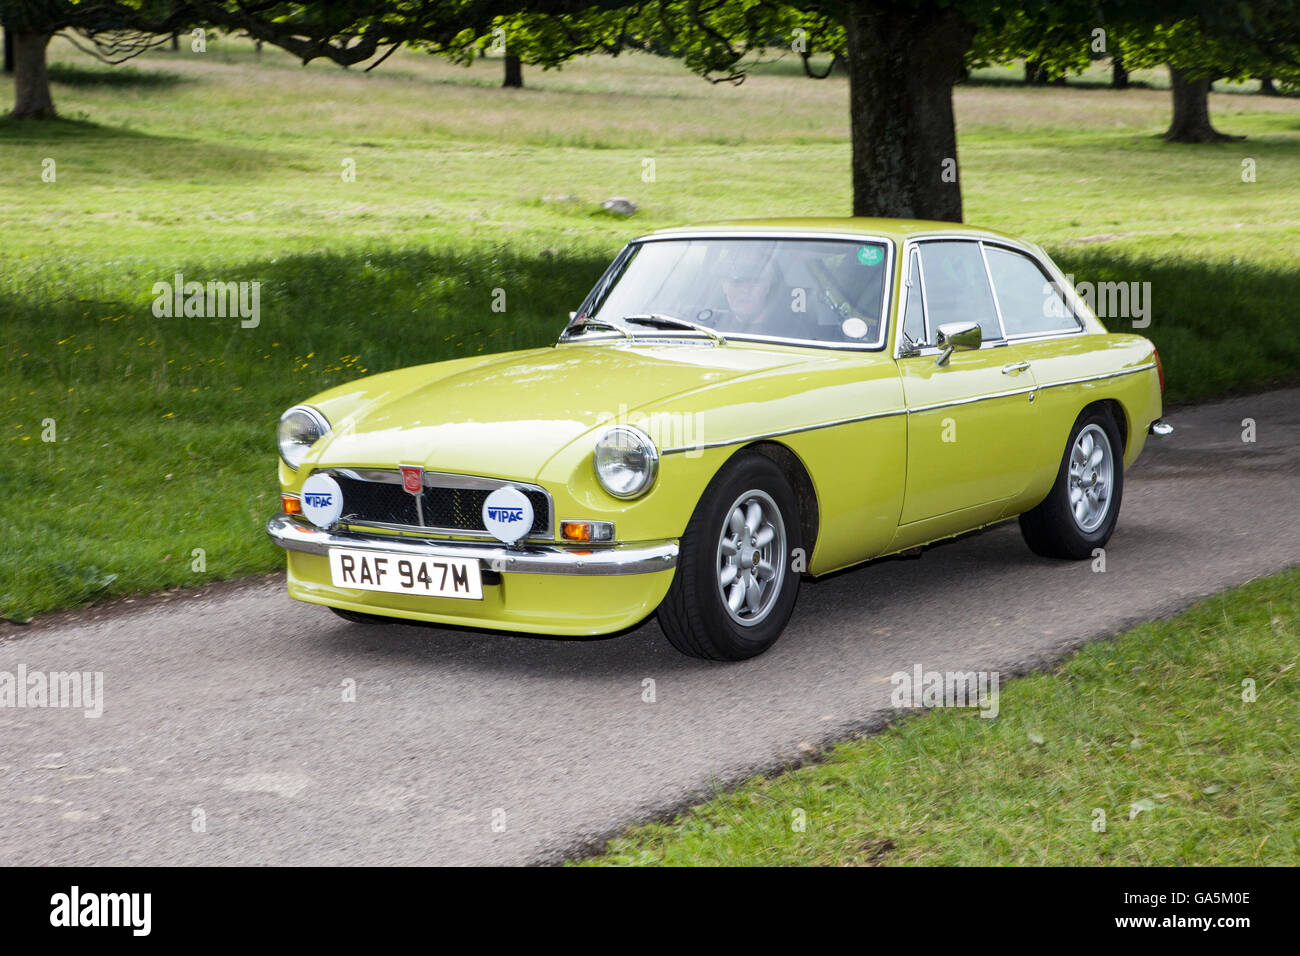 1974 MG B GT at Leighton Hall Classic Car Rally, Carnforth, Lancashire, UK.  3rd July, 2016.  The annual classic car rally takes place at the magnificent Leighton Hall in Carnforth in Lancashire.   1974 yellow MGB GT three-door 2+2 coupé; British classic sports cars MG's  The Leighton Castle spectator event drew thousands of visitors to this scenic part of the country on the north west coast of England.  Credit:  Cernan Elias/Alamy Live News Stock Photo